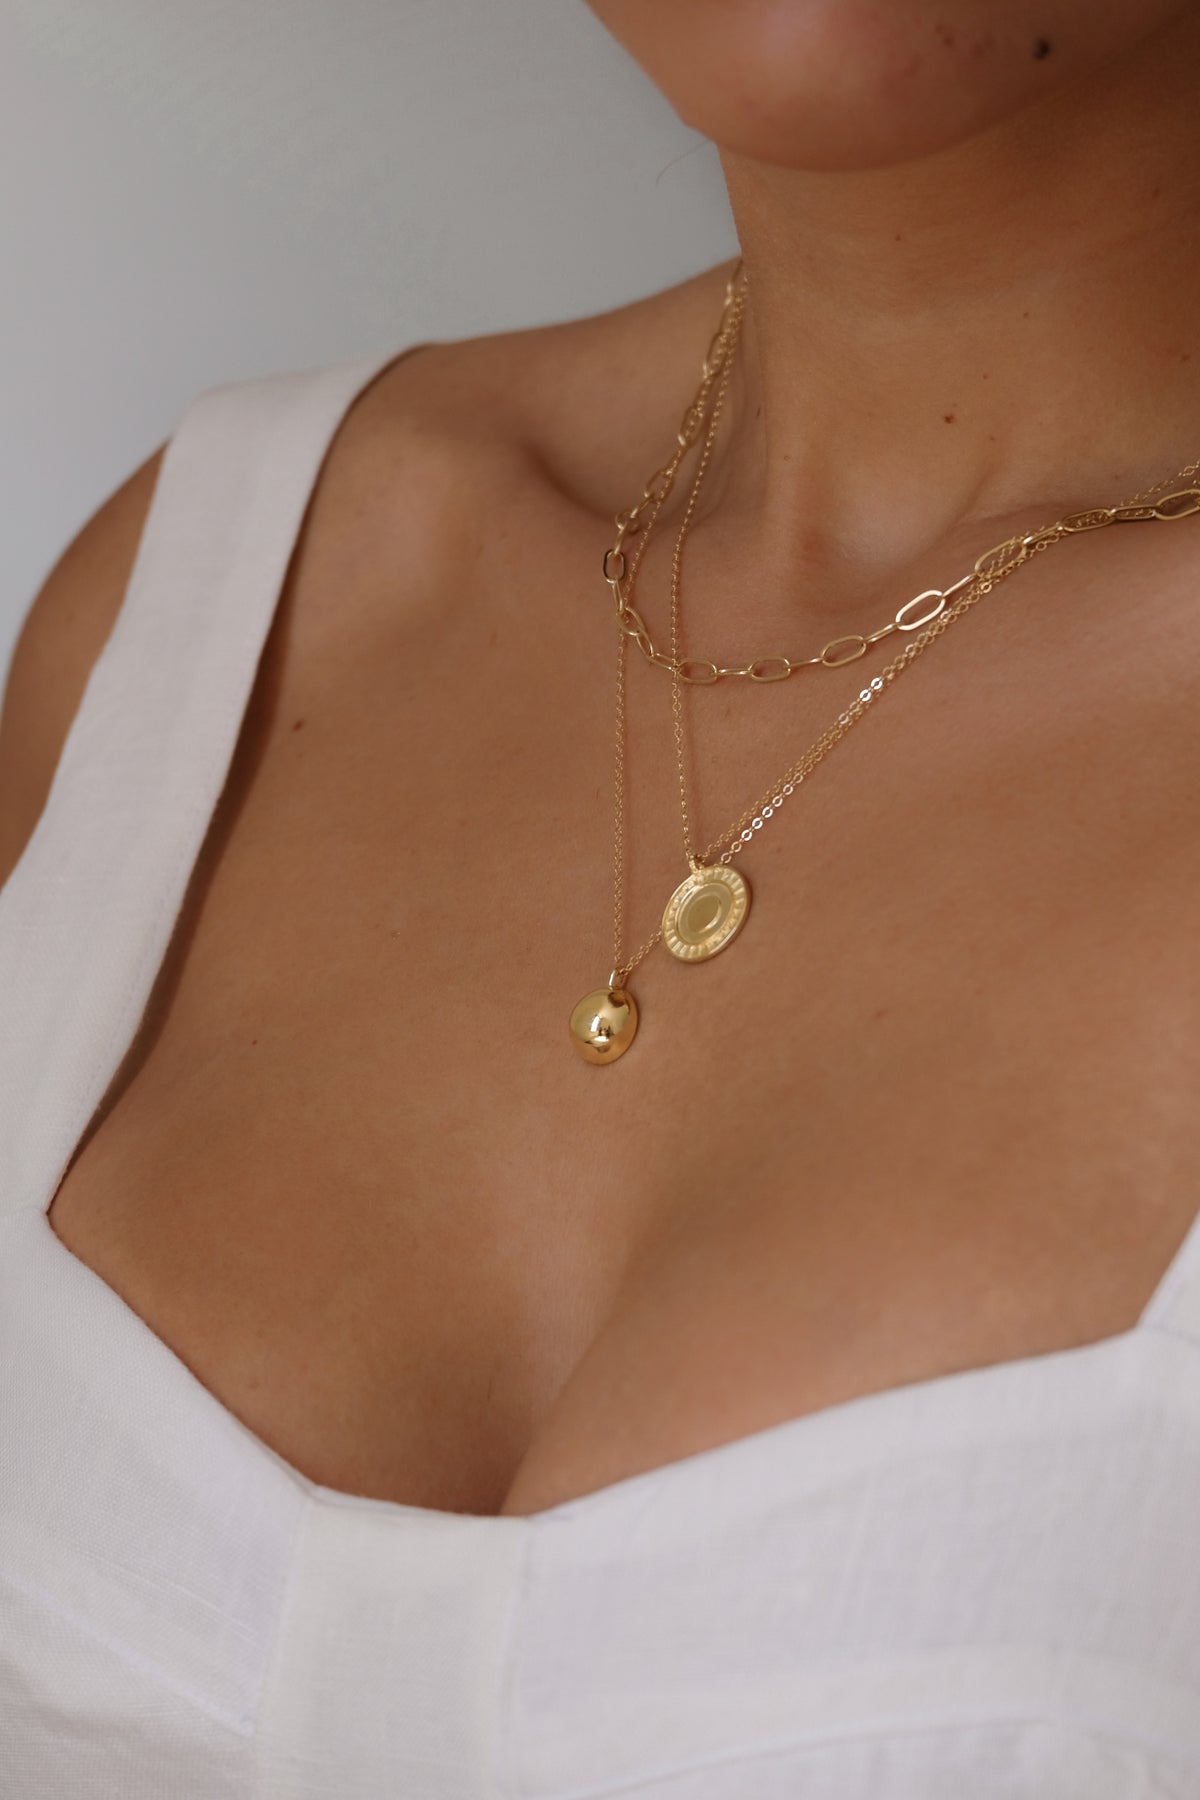 Cluster Necklace